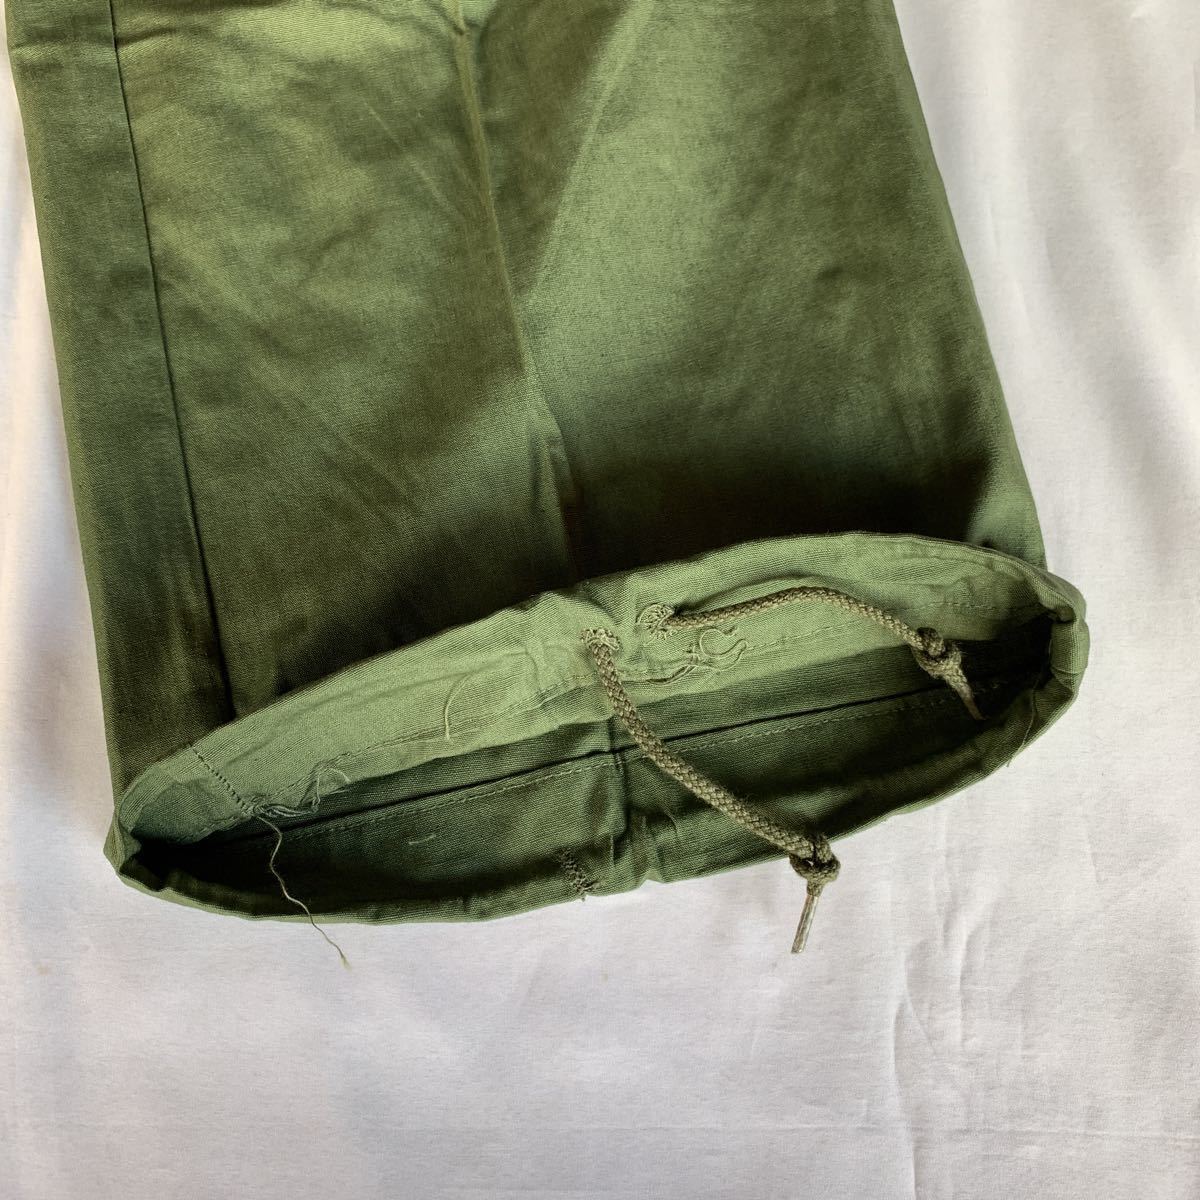 60s U.S.ARMY JUNGLE FATIGUE TROUSERS 3rd DEAD STOCK USARMY ジャングルファティーグ カーゴパンツ ノンリップ デッドストック 送料無料 _画像6